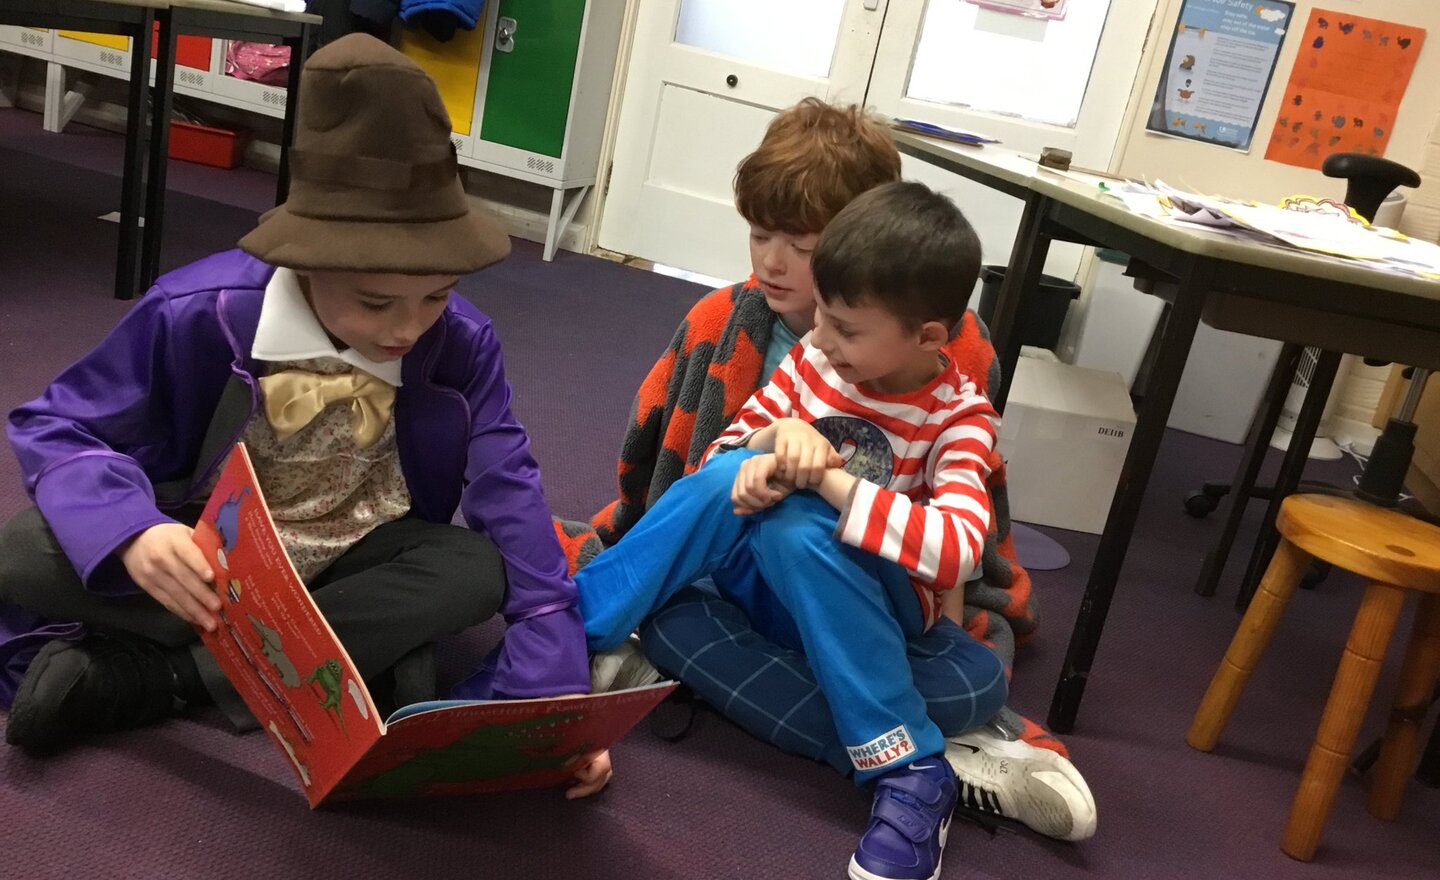 Image of Sharing Books on World Book Day